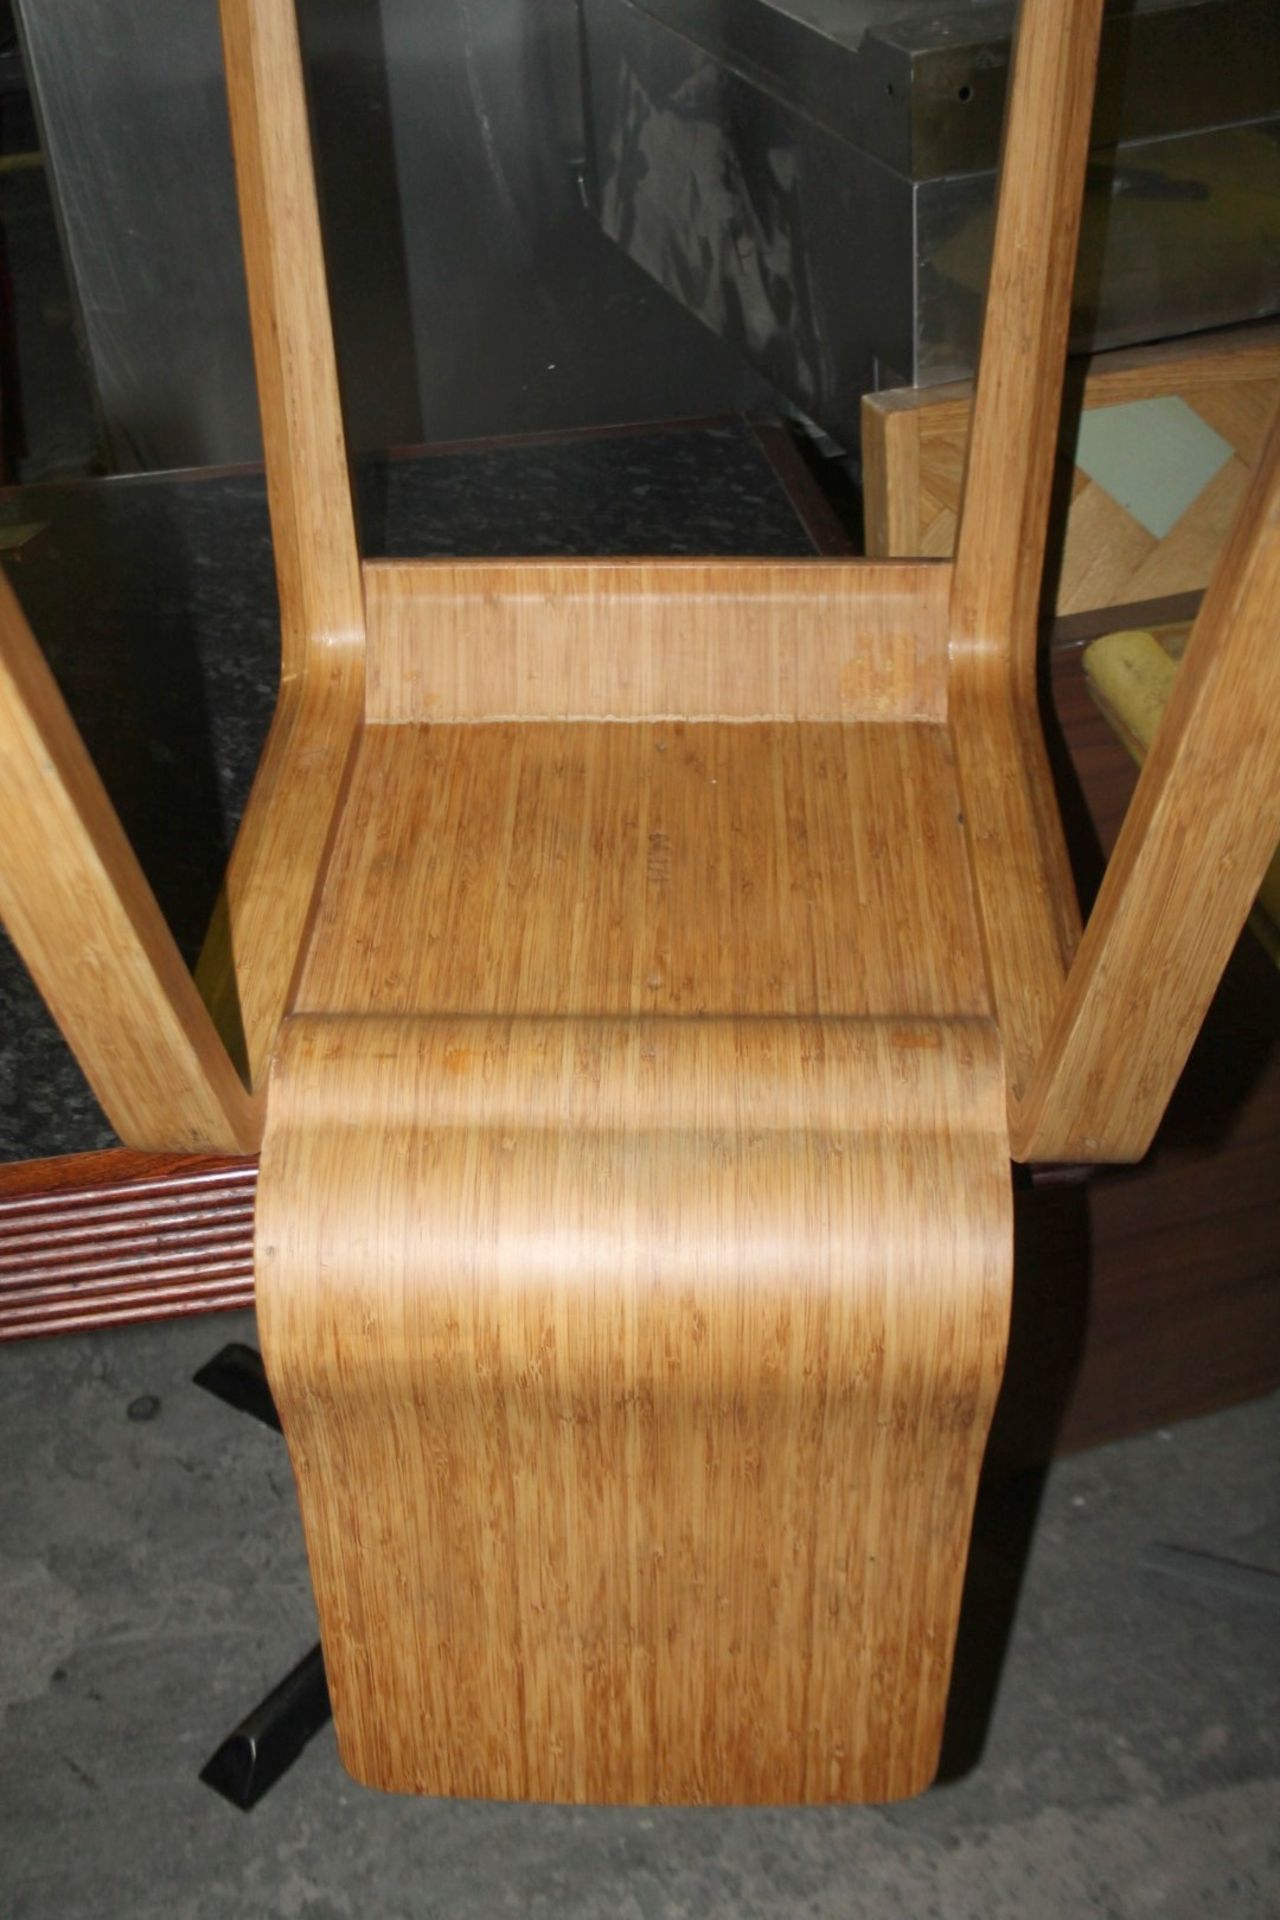 1 x Stylish Wooden Chair With A Curved Design - Dimensions: H80 x W42 x D58cm / Seat 44cm - Ref: - Image 4 of 4